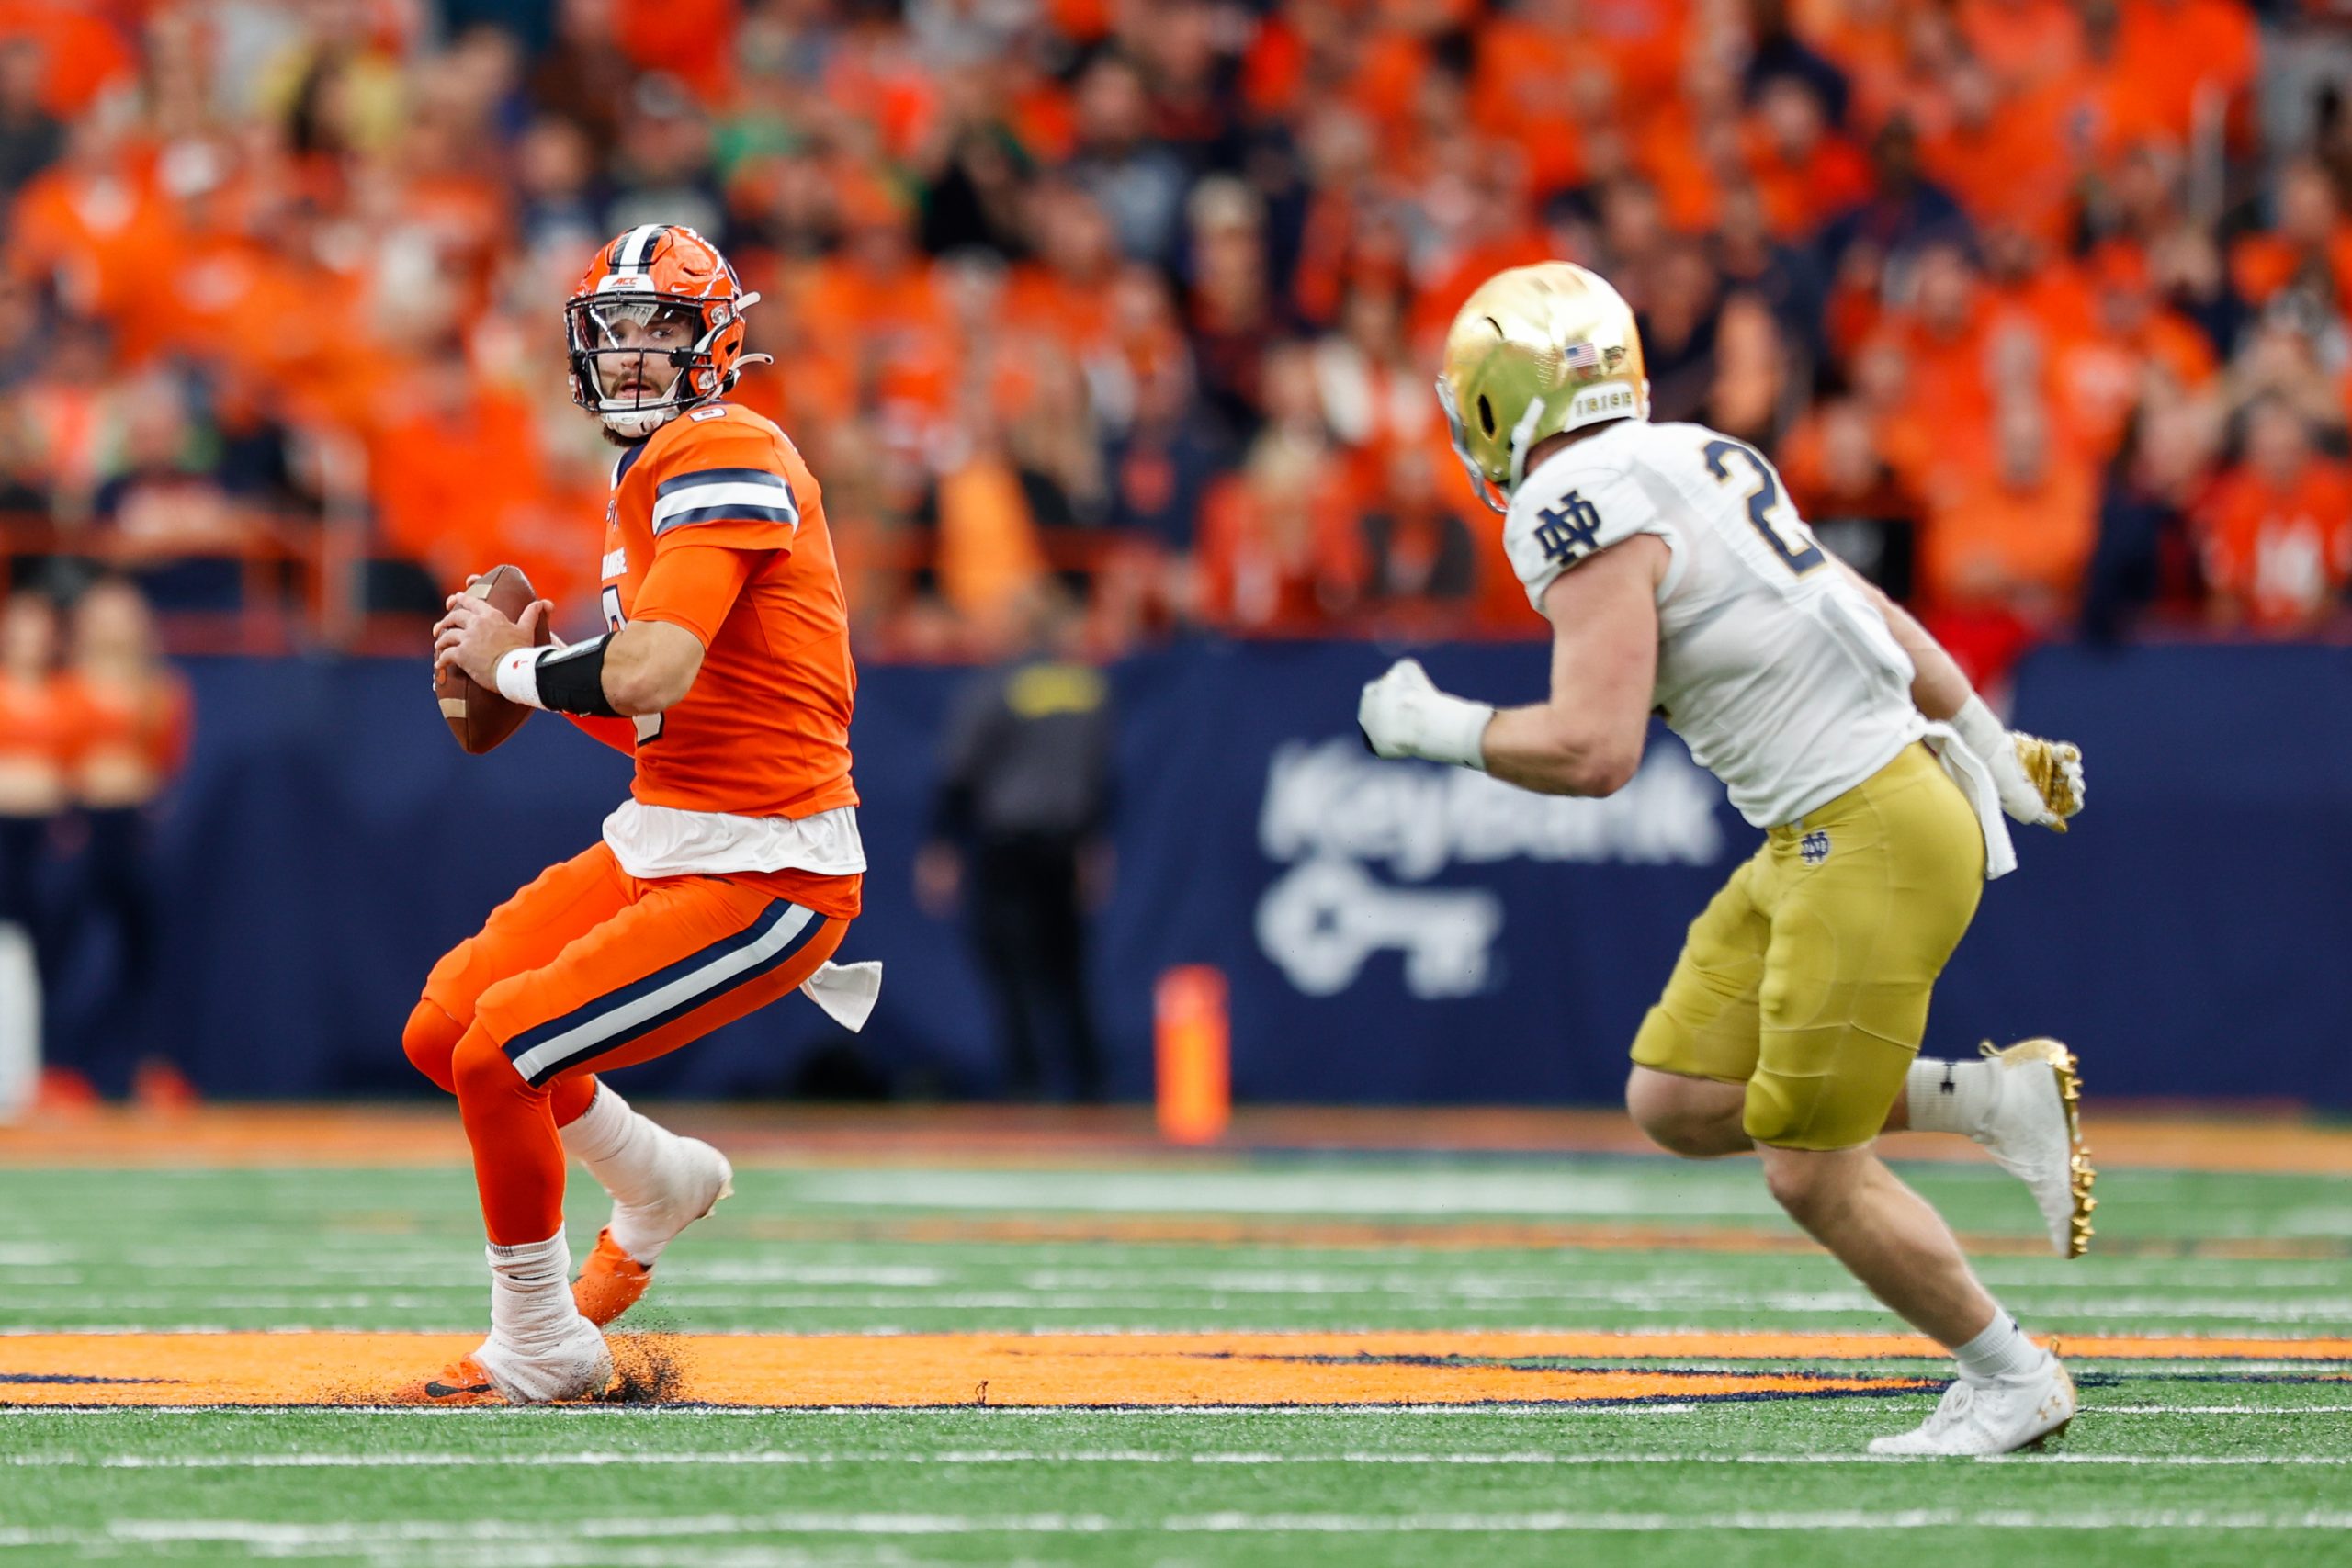 SYRACUSE, NY - OCTOBER 29: Garrett Shrader #6 of the Syracuse Orange prepares to pass against the Notre Dame Fighting Irish at JMA Wireless Dome on October 29, 2022 in Syracuse, New York. (Photo by Isaiah Vazquez/The Newshouse)